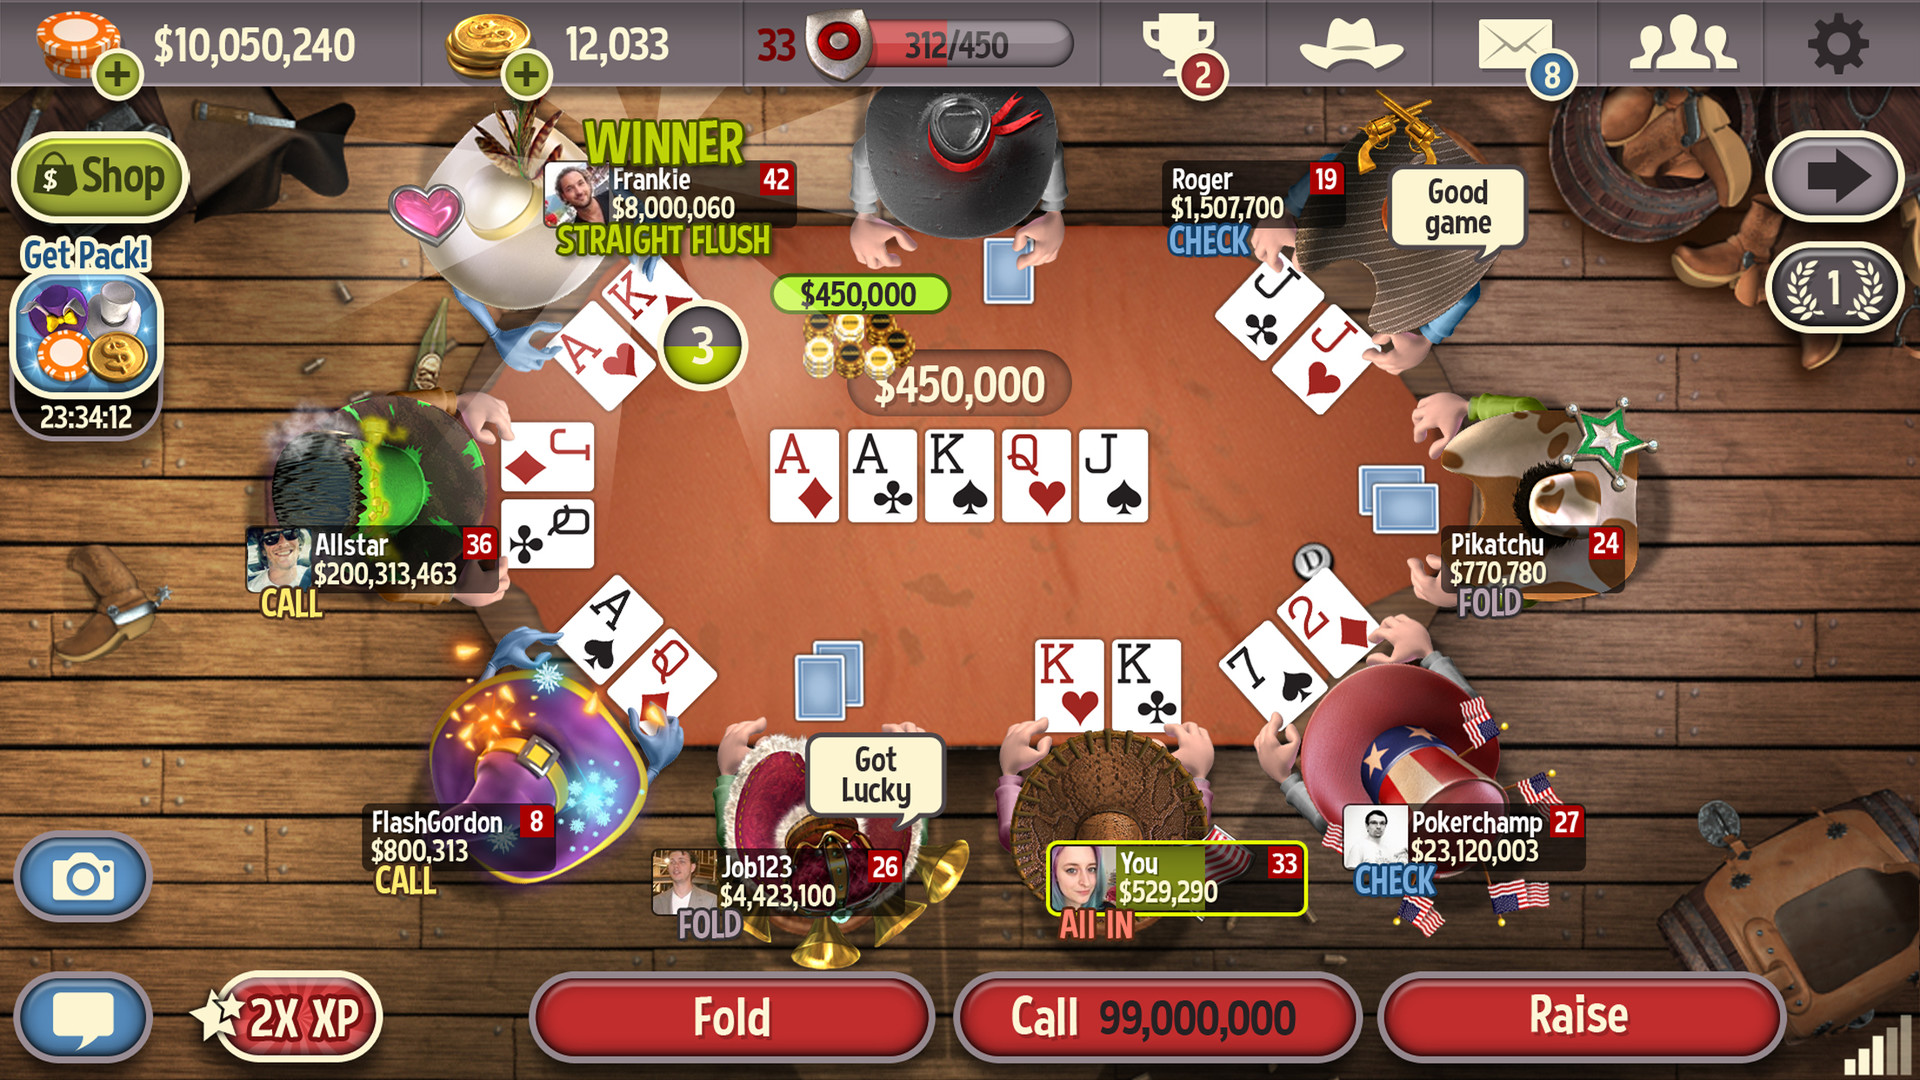 Governor of poker 2 free online